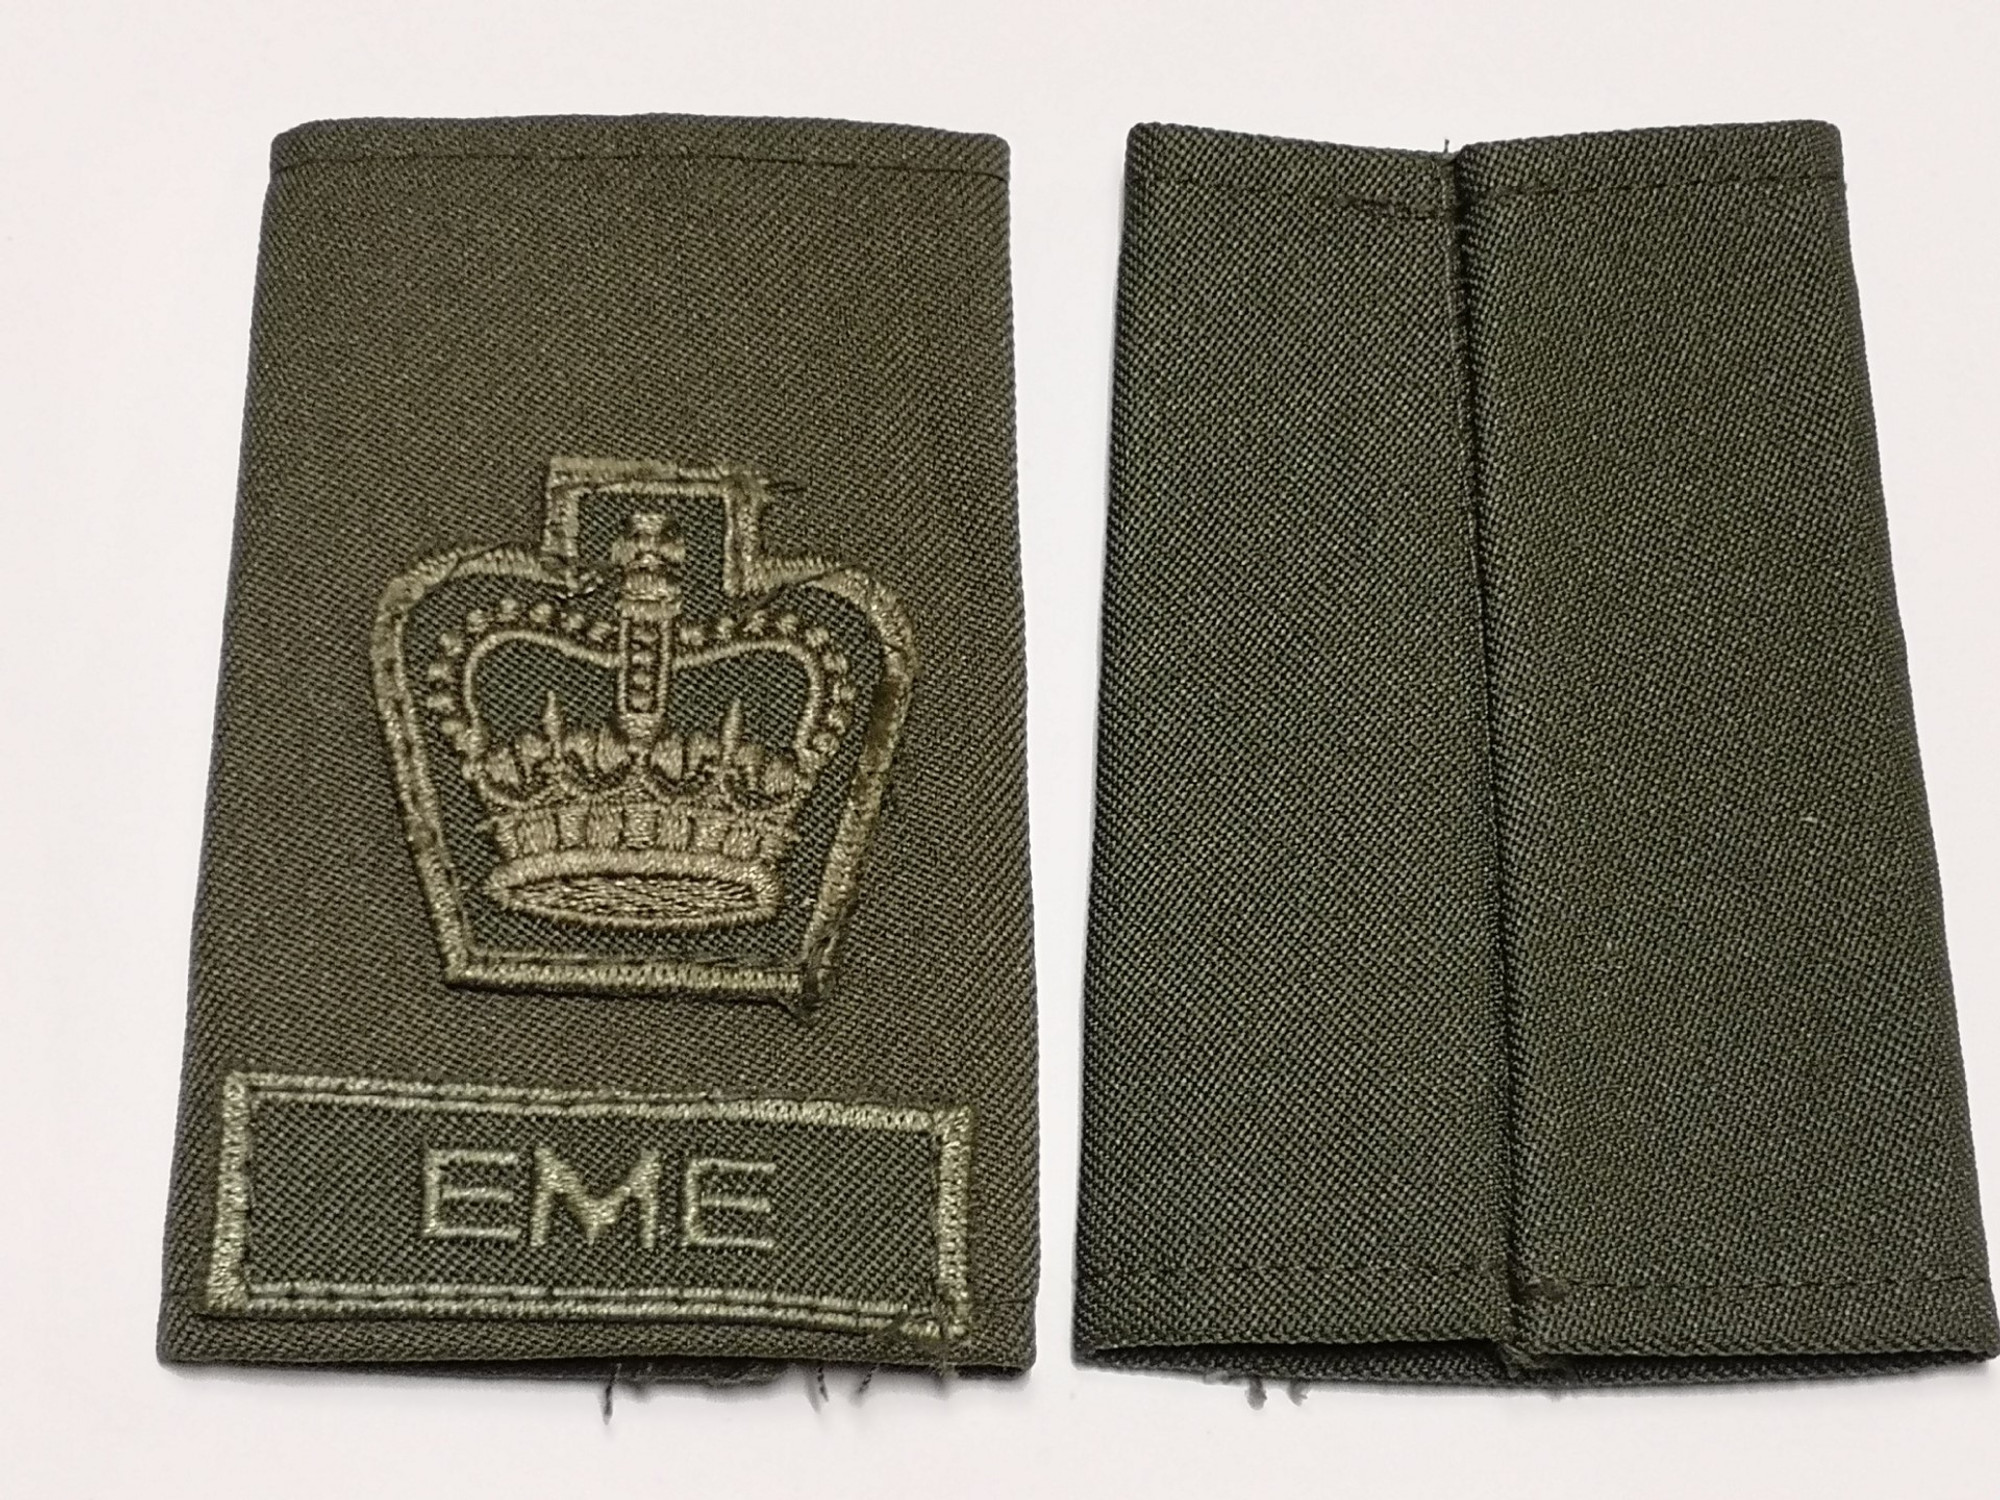 Canadian Armed Forces Green Rank Epaulets EME - Warrant Officer